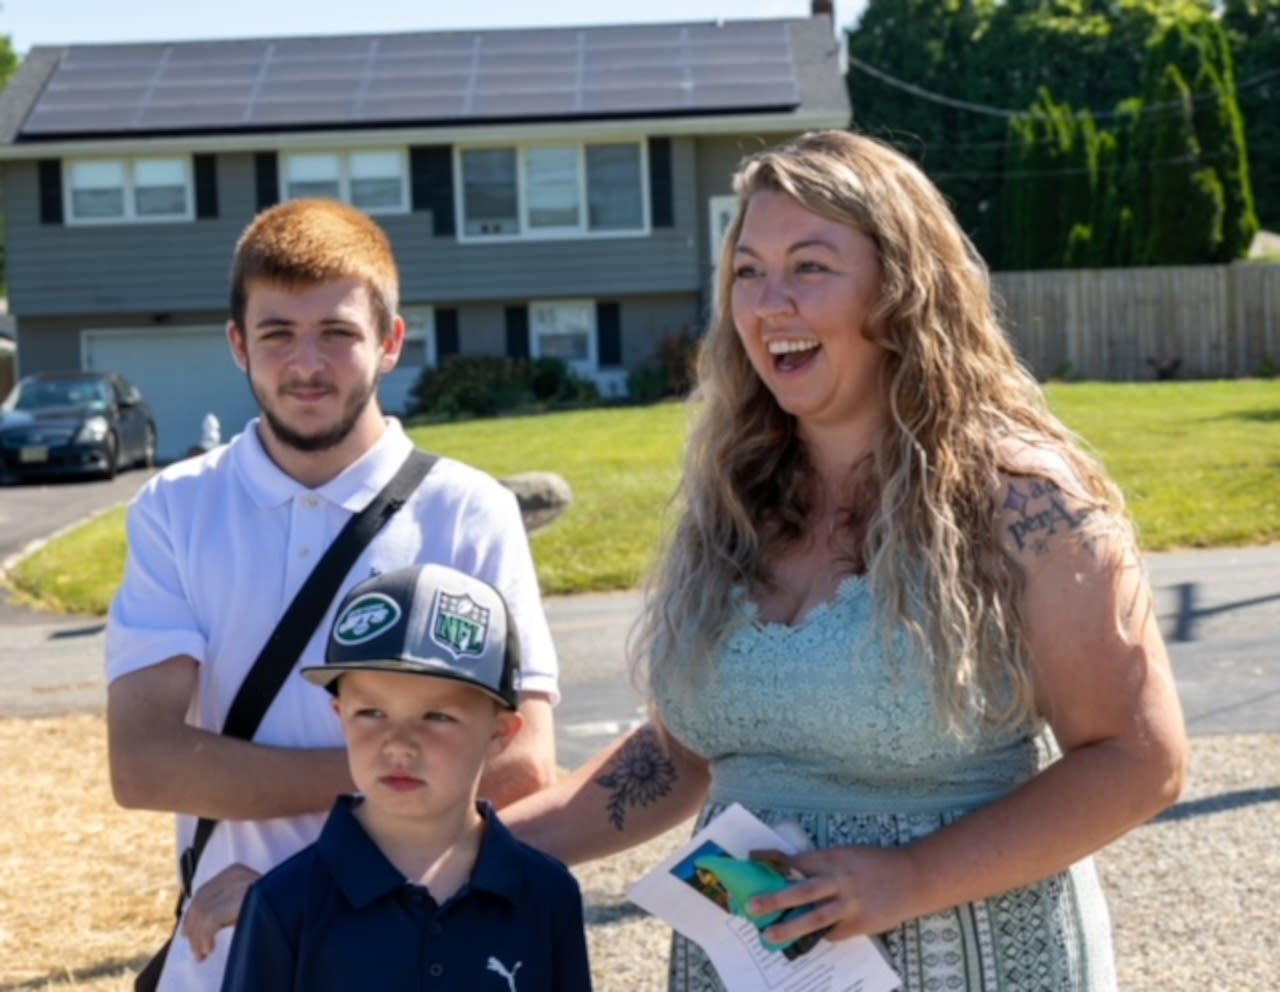 Mom from Phillipsburg promised her little brother a home of their own, builds new life